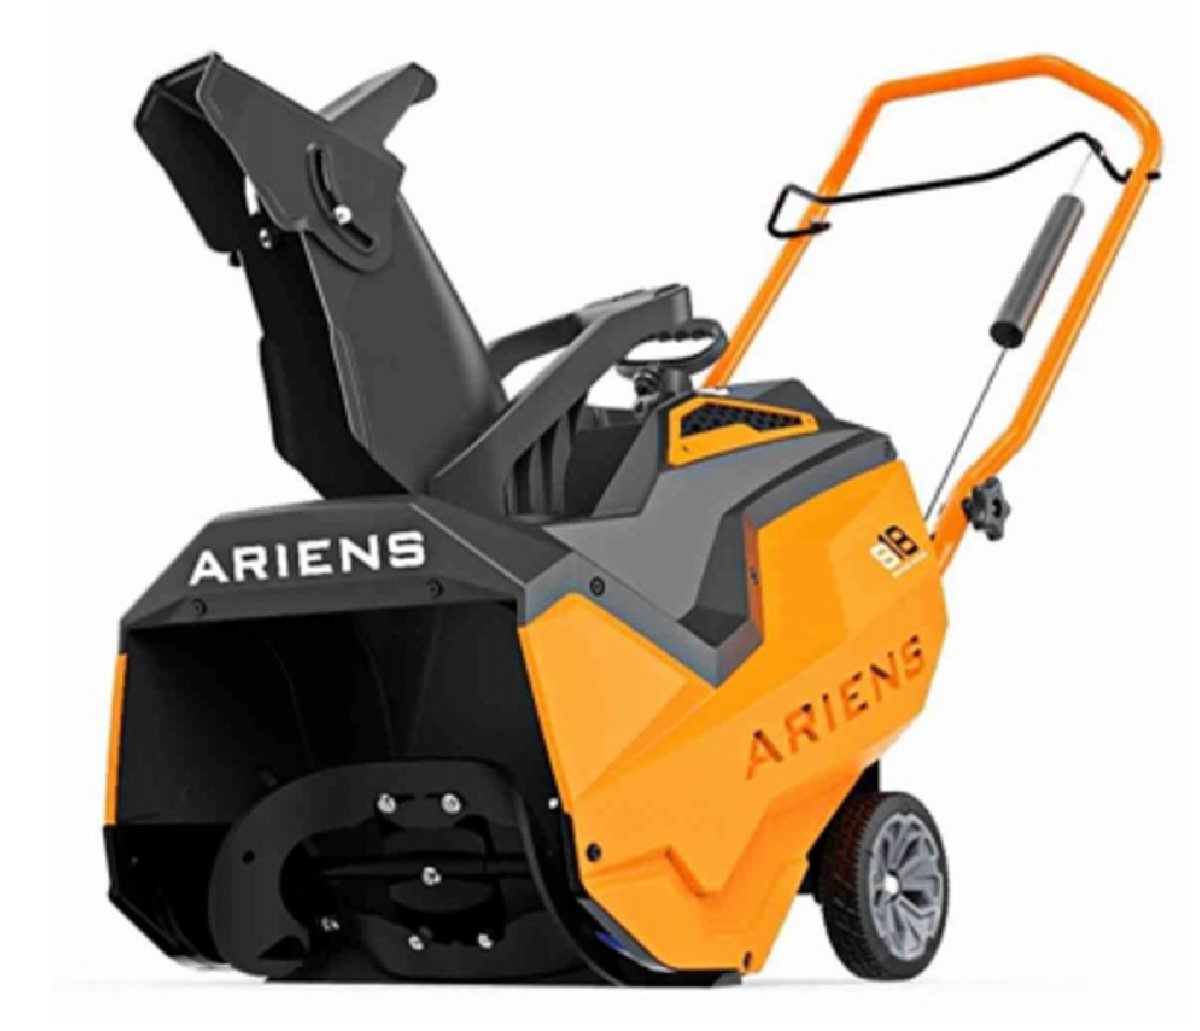 Ariens 100777 18 in. 1Stage Snow Thrower